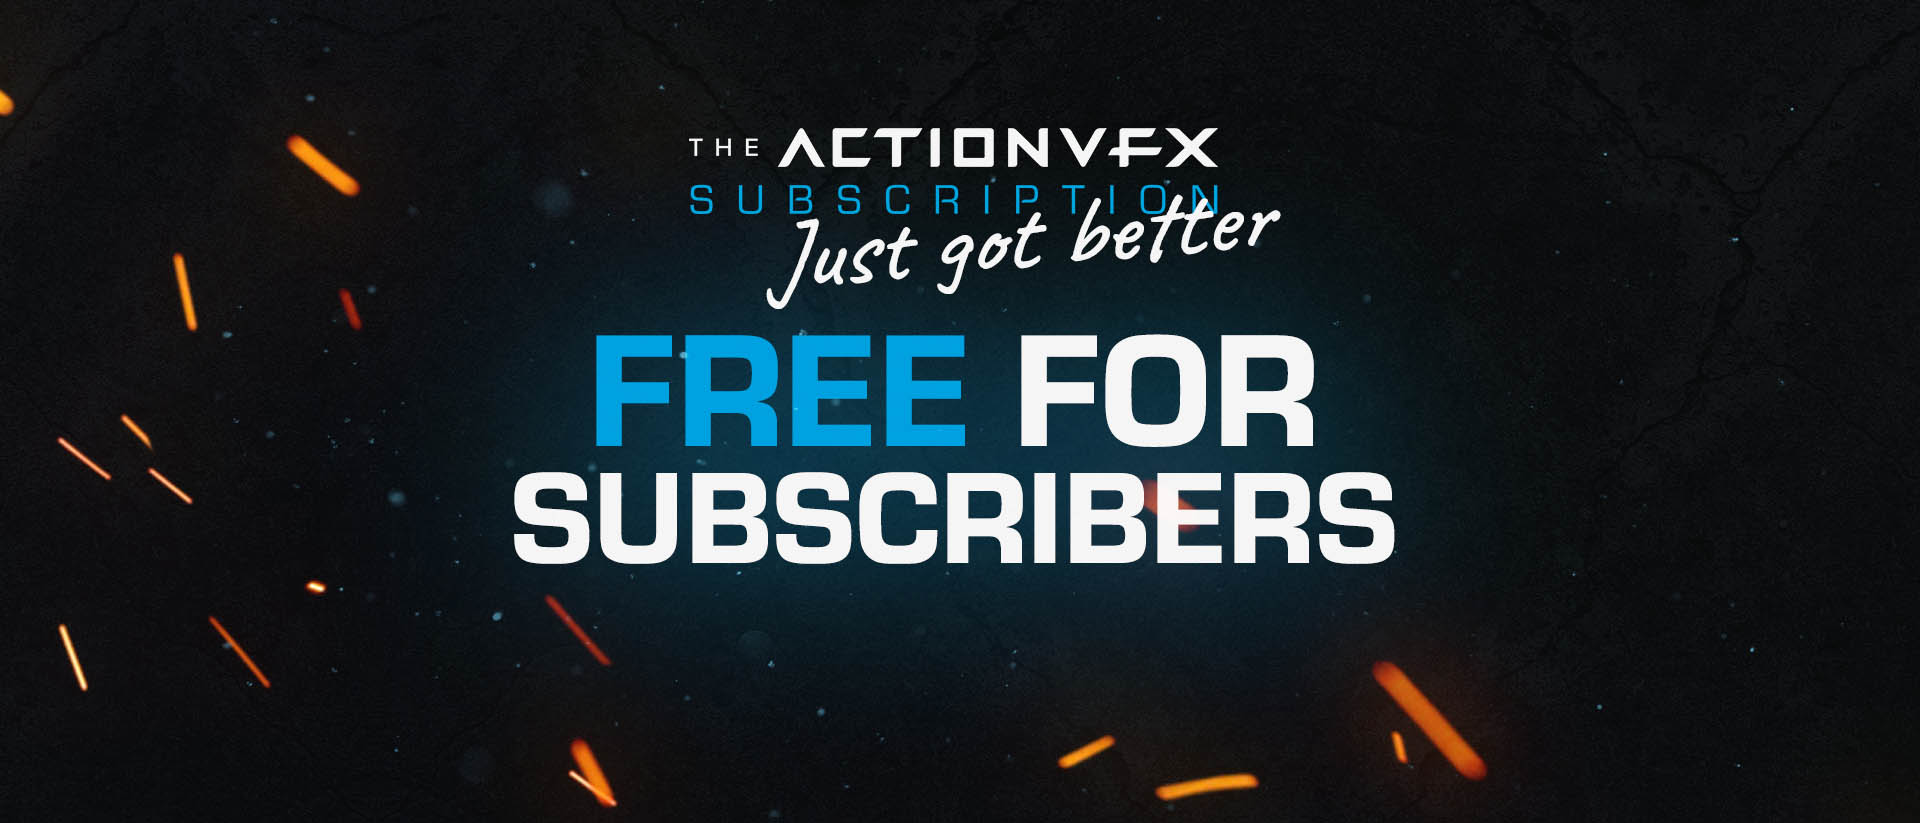 Free for ActionVFX Subscribers | 30 Free Collections Available Now!